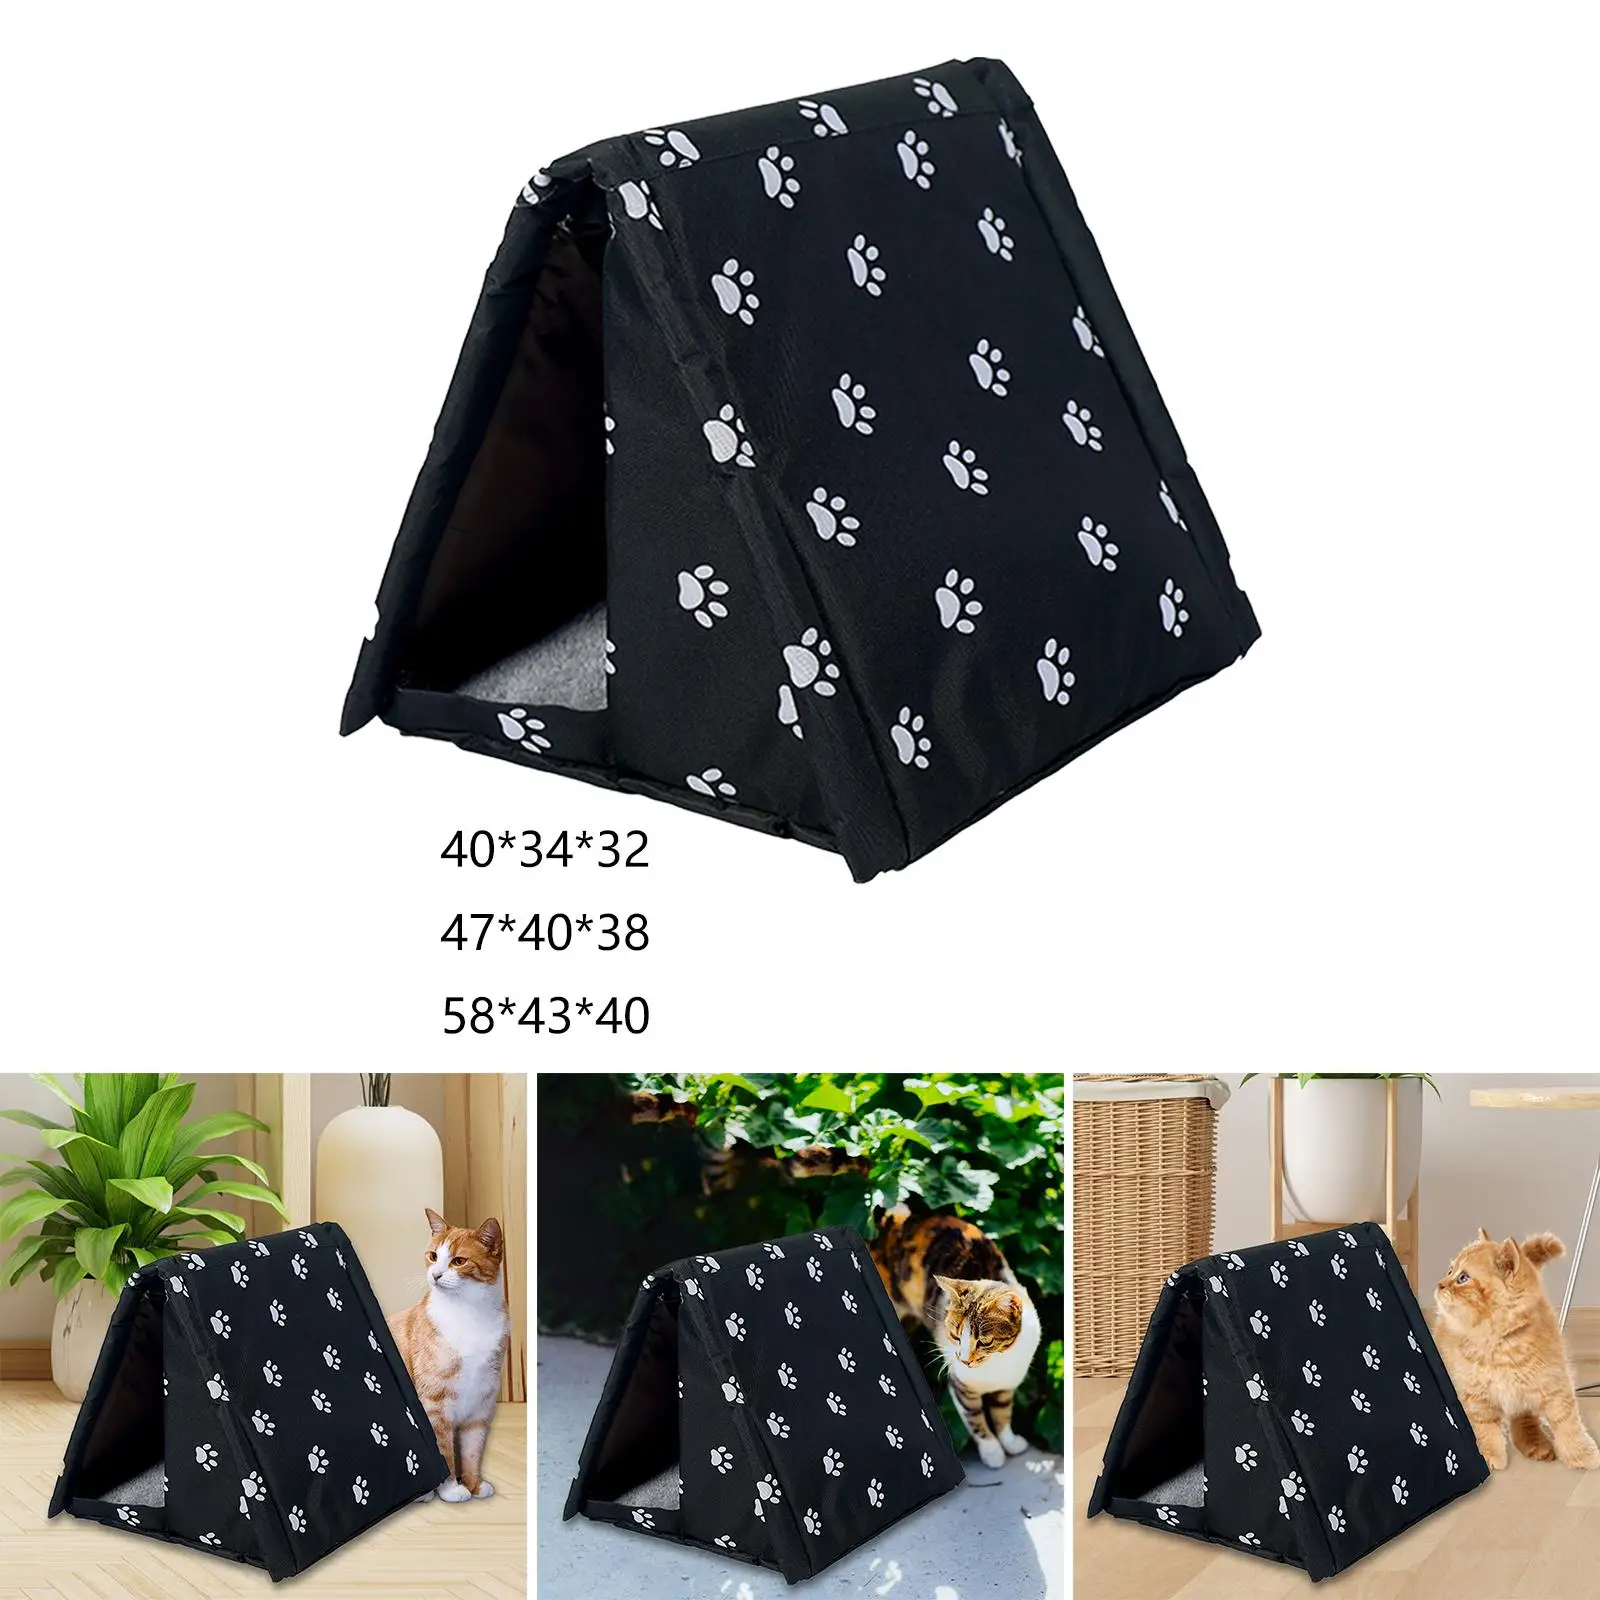 Stray Cats Shelter Weatherproof Warm Cave Cat Bed Small Dog Kennel Cabin